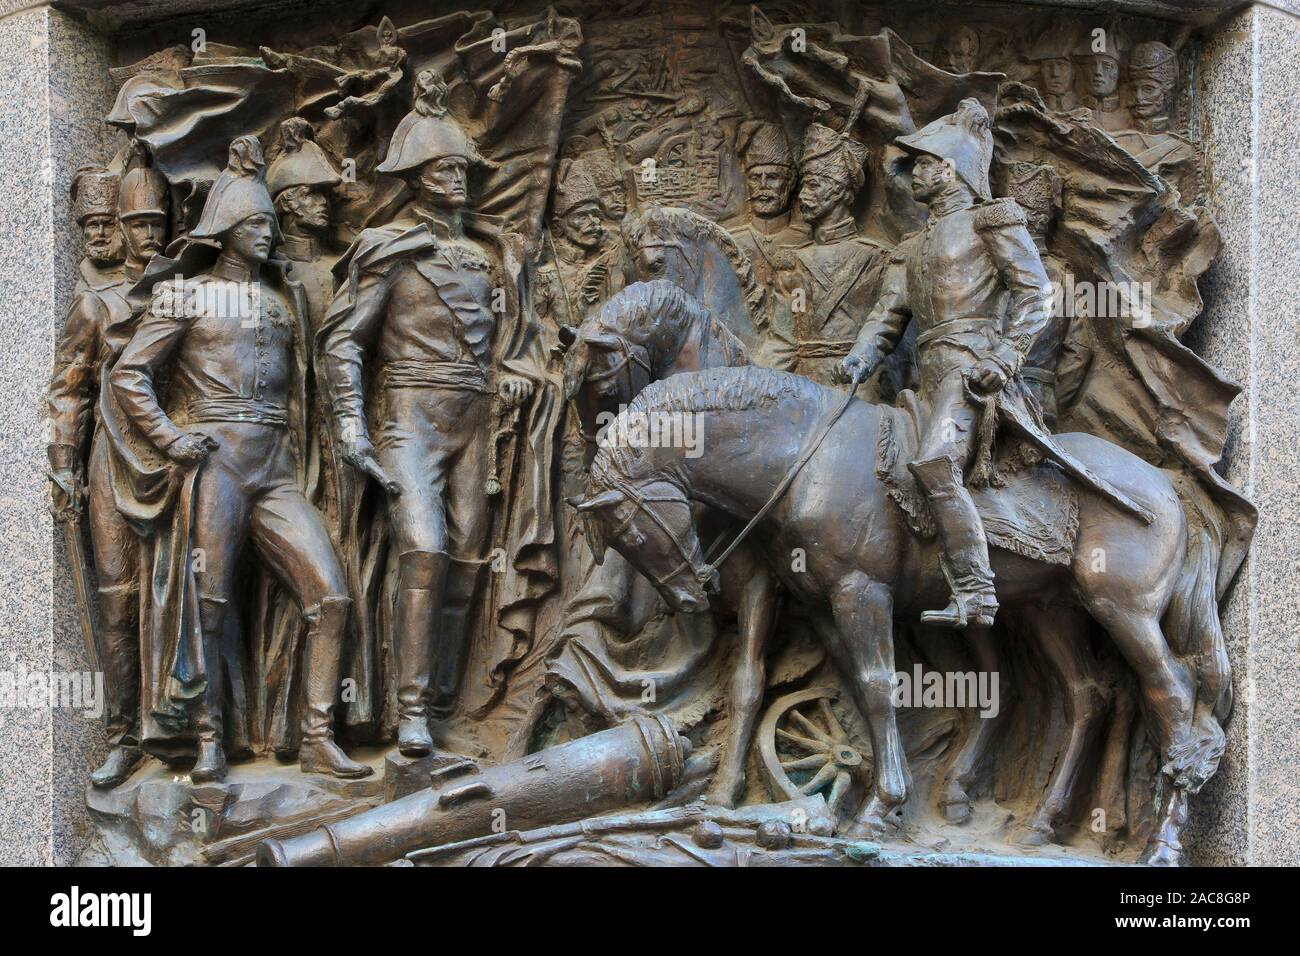 Bas-relief to Tsar Alexander I of Russia for his victory over Napoleon Bonaparte at the Battle of Leipzig (16 to 19 October 1813) Stock Photo